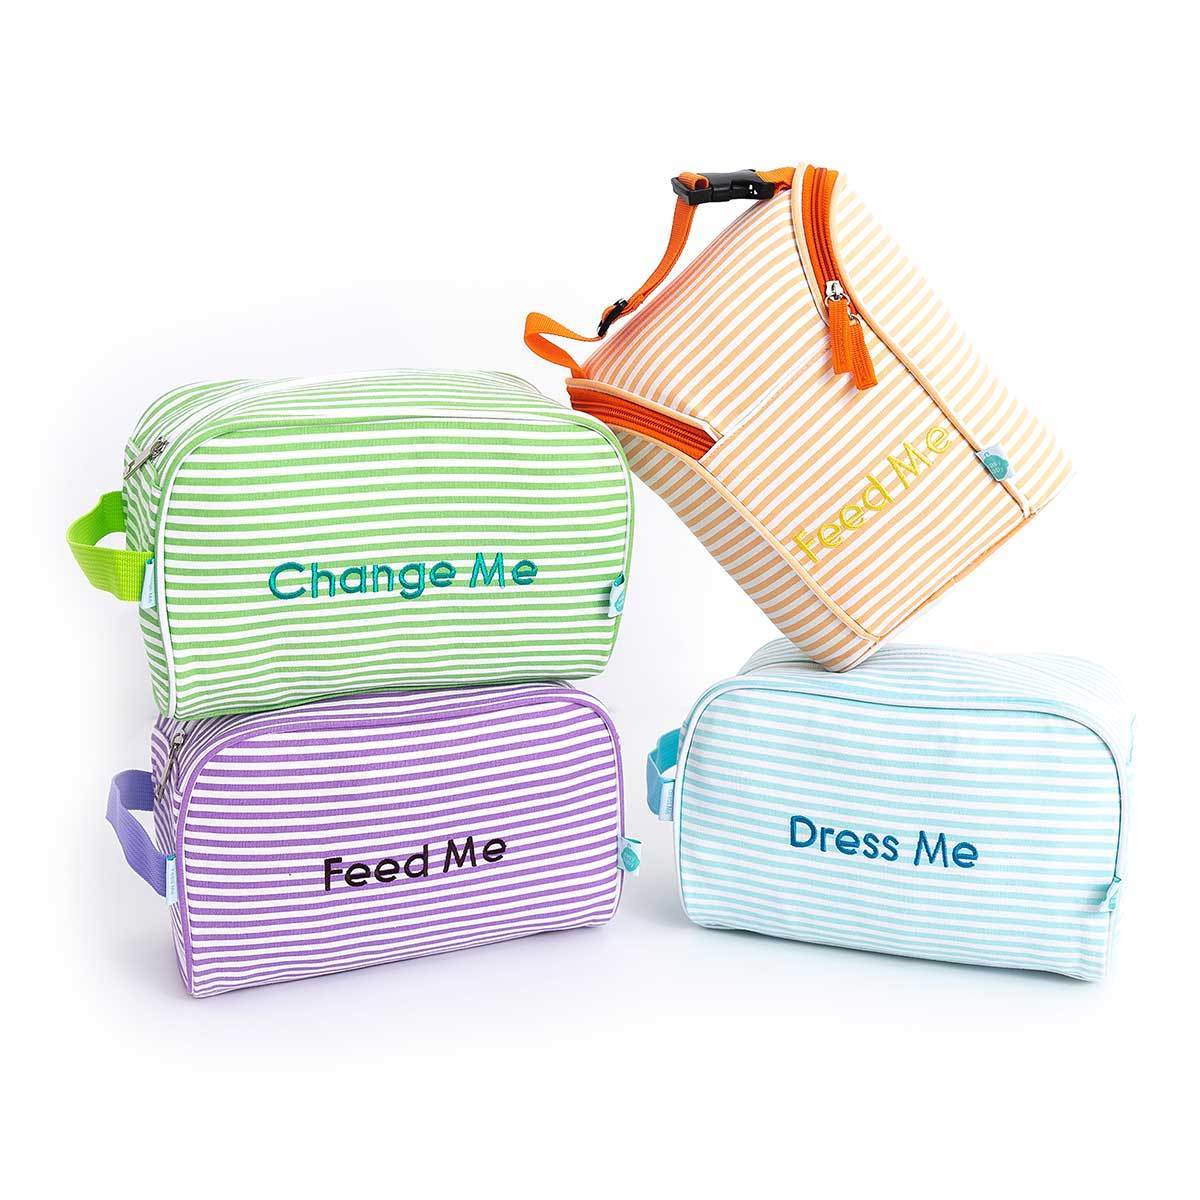 Diaper Bag Organizer Insert-Set of 4 Labeled Diaper Bag Organizing Pouches  -Waterproof Packing Cubes for Diaper Bag- Diaper Bag Packing Cubes with Wet